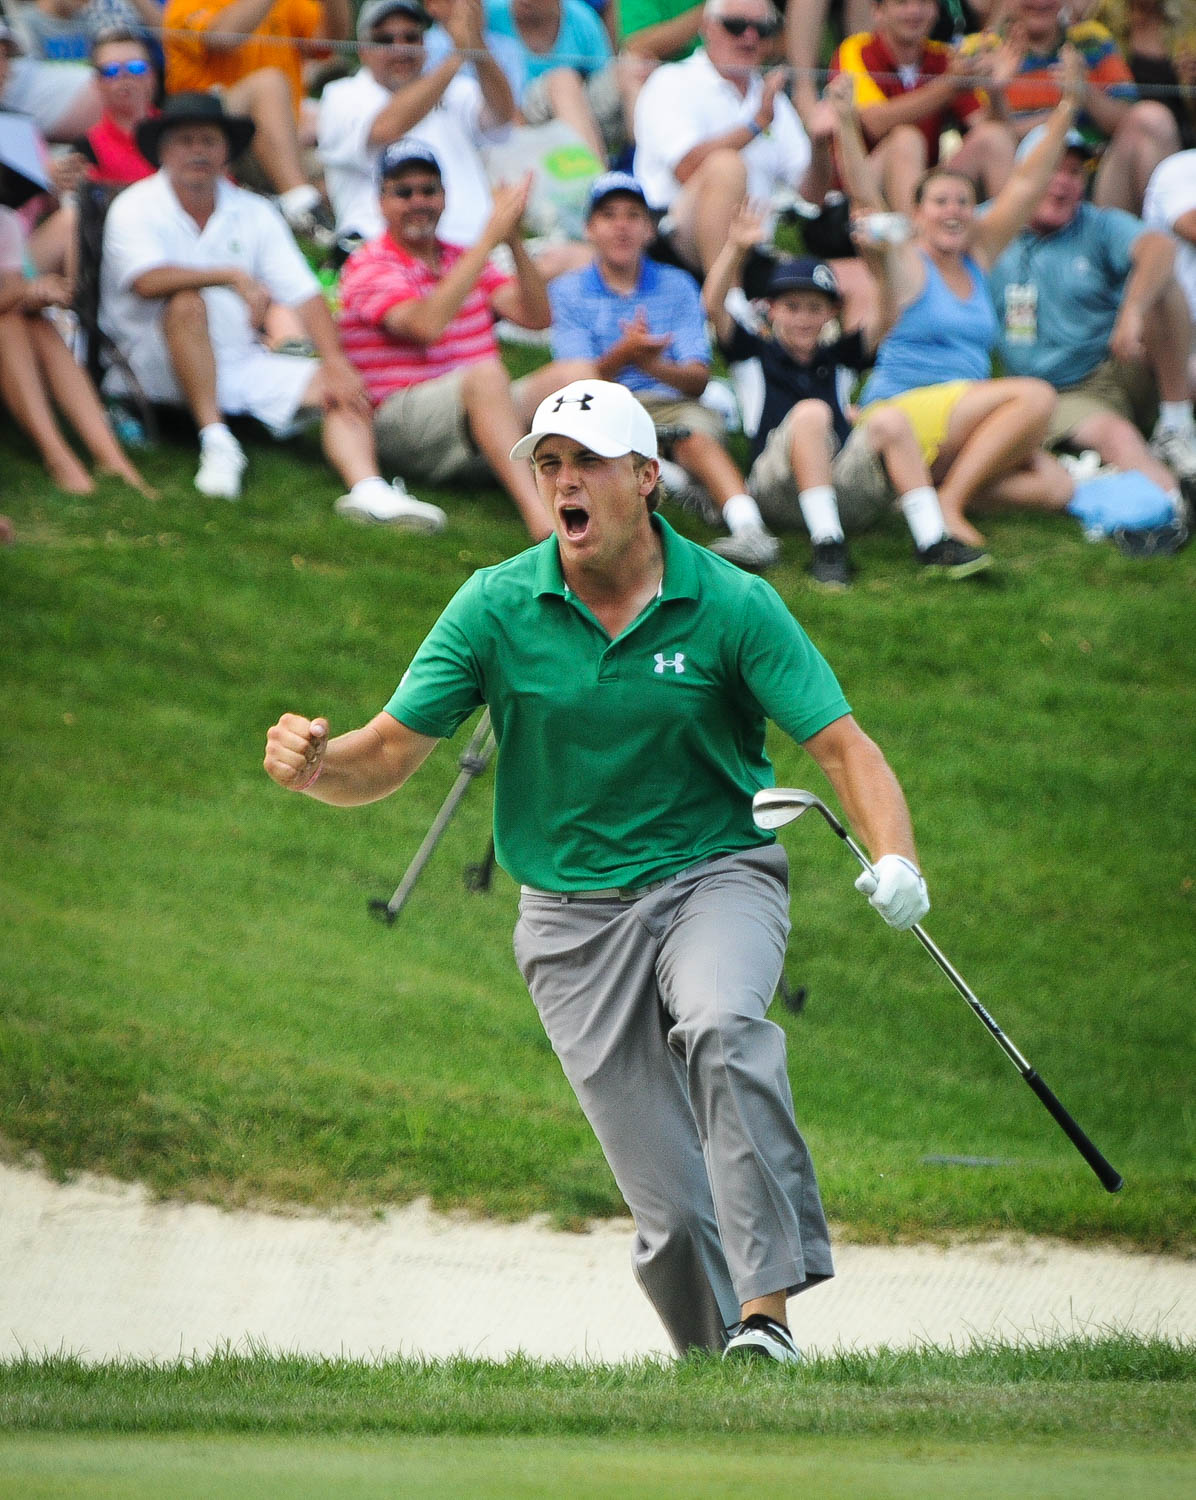 PGA Tour pro Jordan Spieth reacts to chipping in from the bunker for a birdie on the 18th hole during the final round of the John Deere Classic golf tournament in Silvis, Ill., Sunday, July 14, 2013. Spieth won the tournament on the 5th playoff hole. (Todd Mizener - Dispatch/Argus)